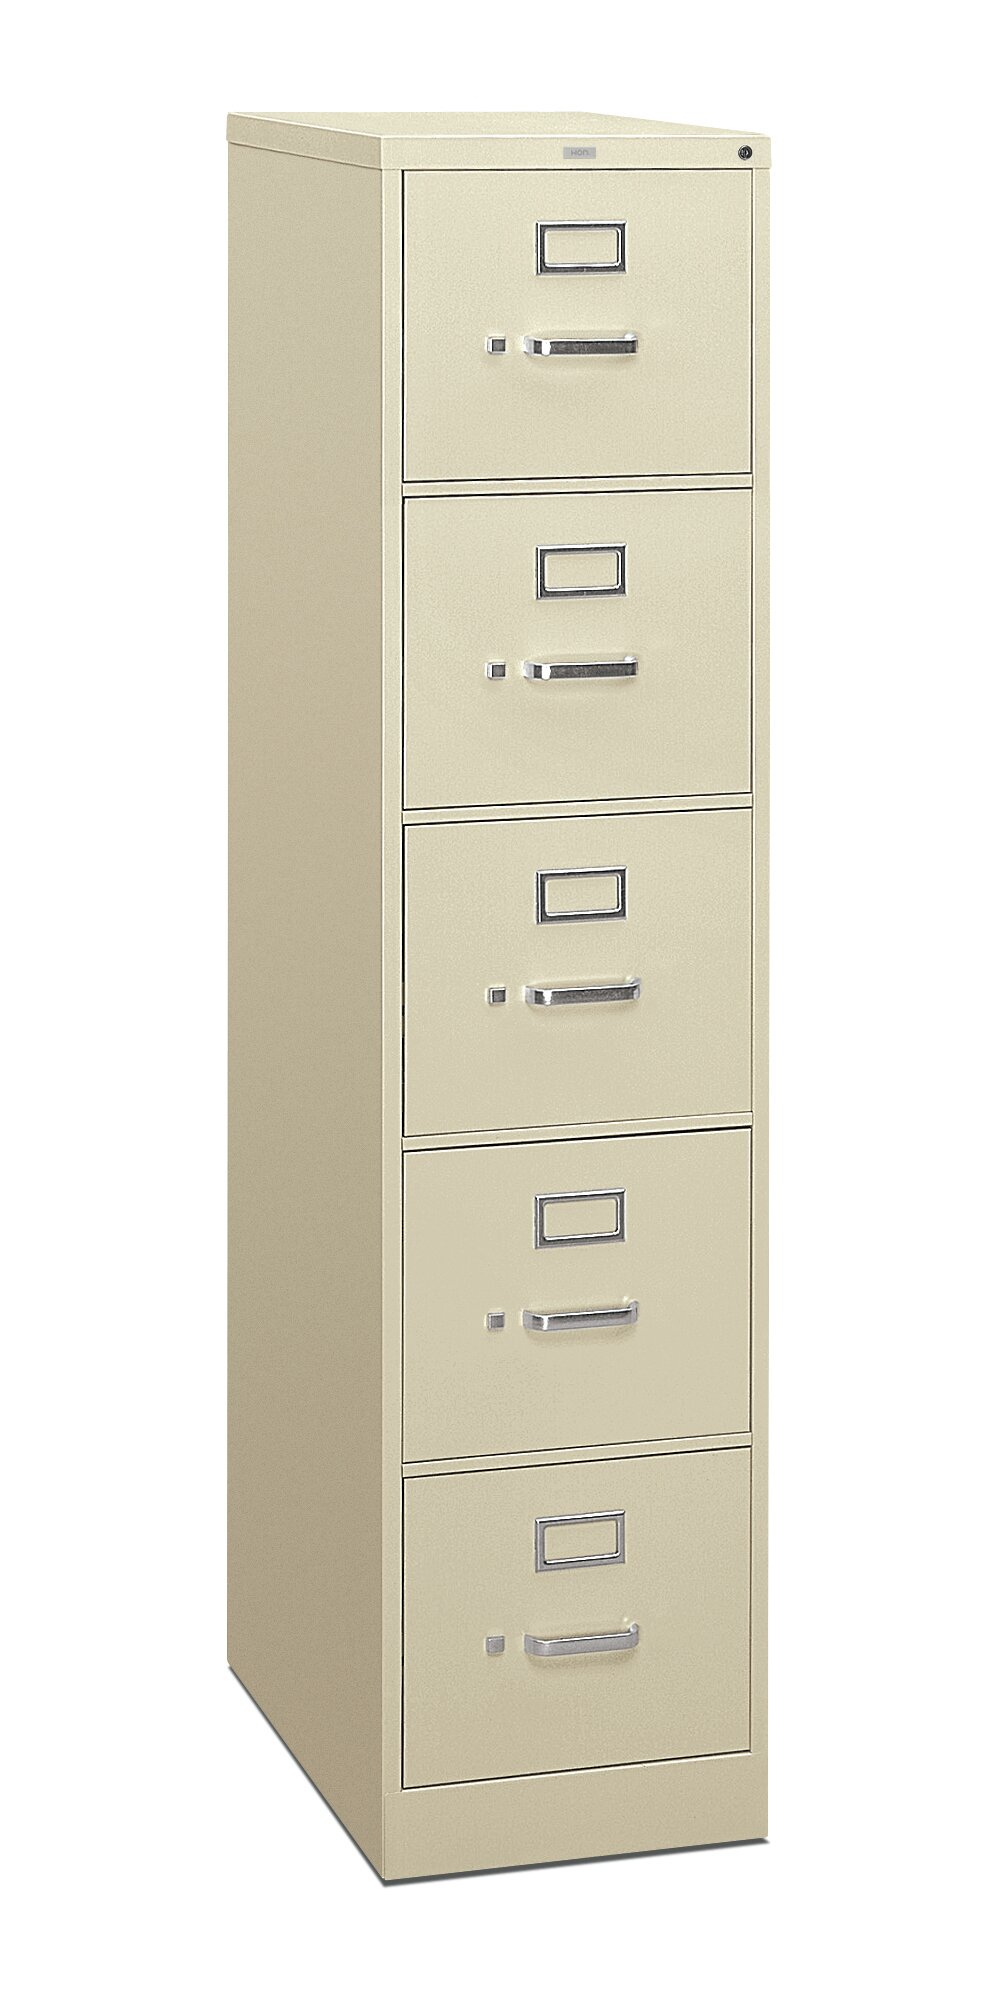 Hon 310 Series 5 Drawer Vertical File Wayfair within proportions 1000 X 2001